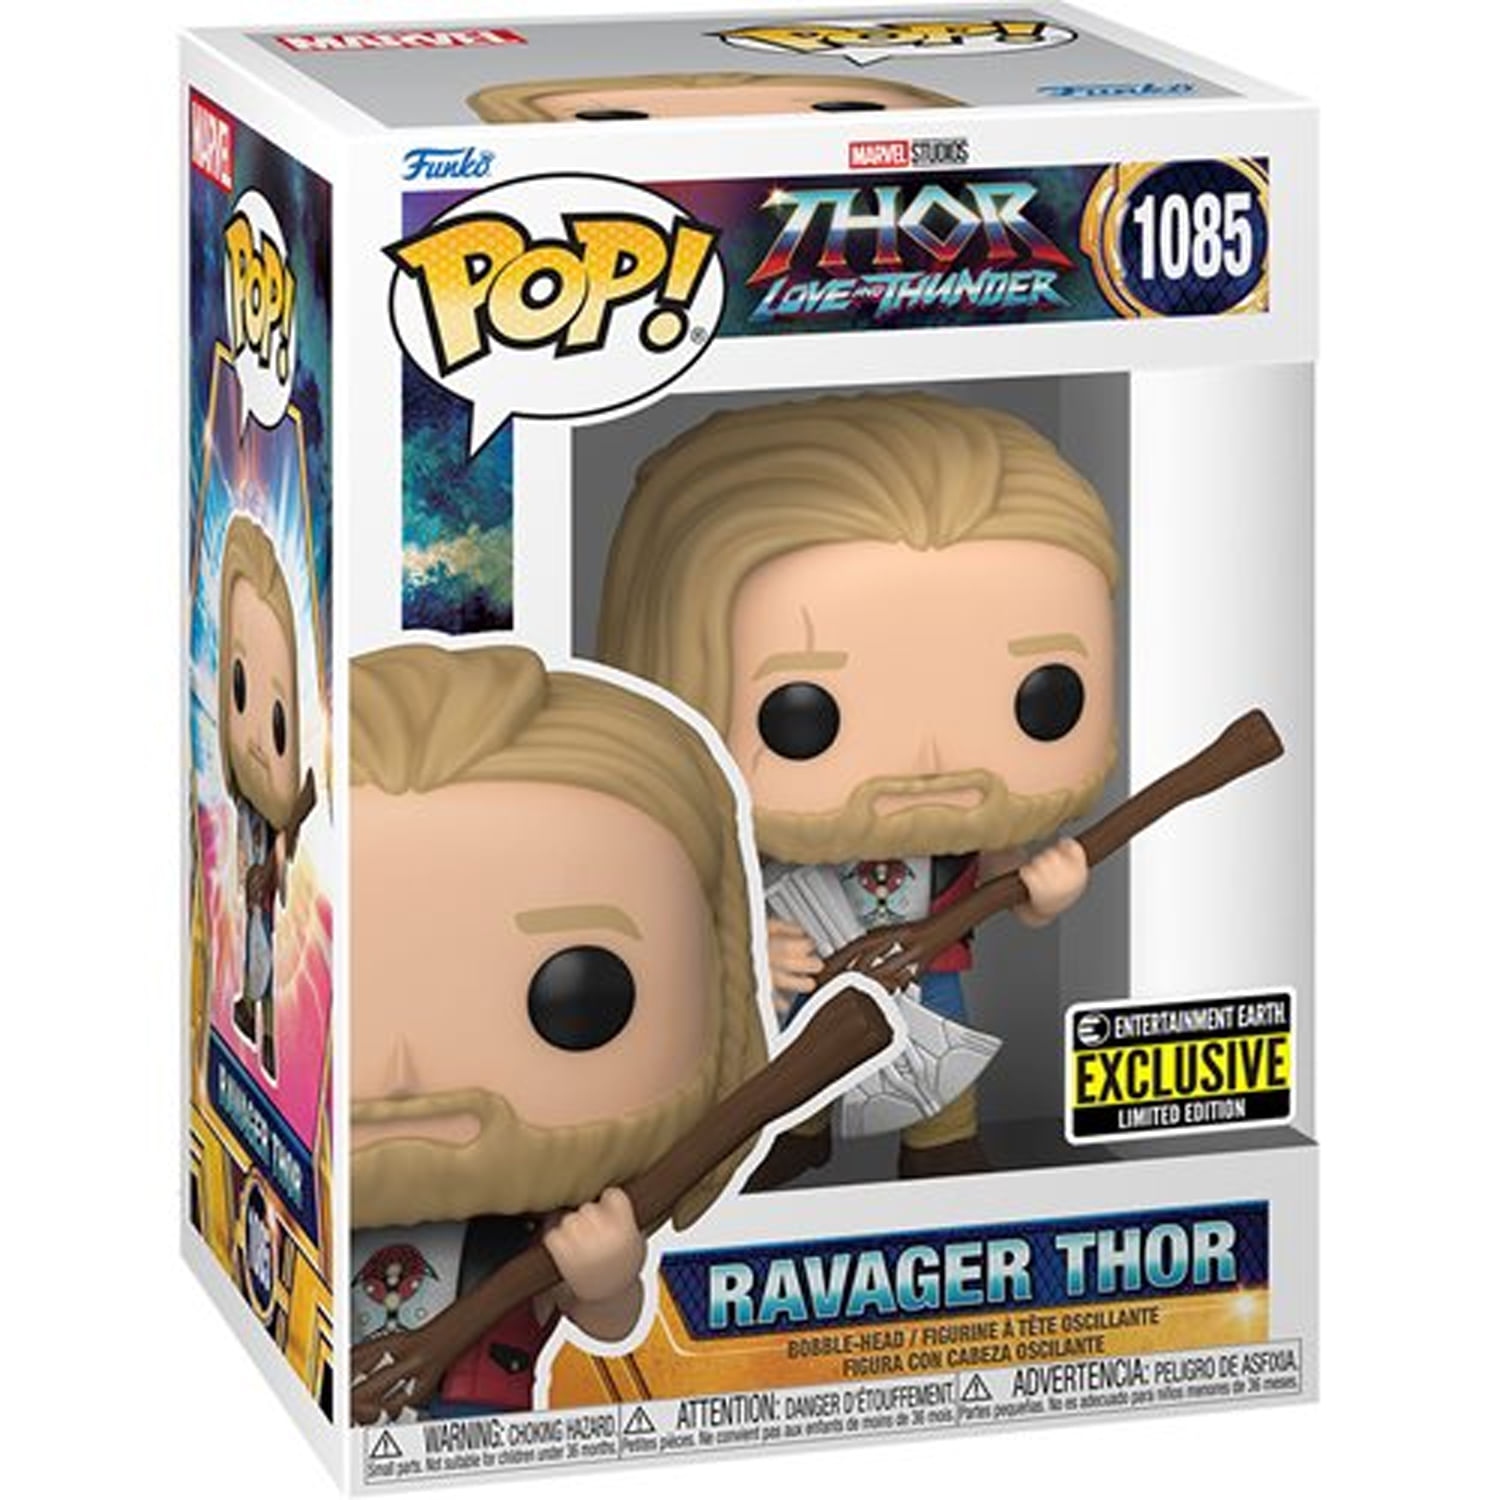 Funko Pop Vinyl Figure Thor Love and Thunder Ravager Thor 1085 Entertainment Earth Exclusive